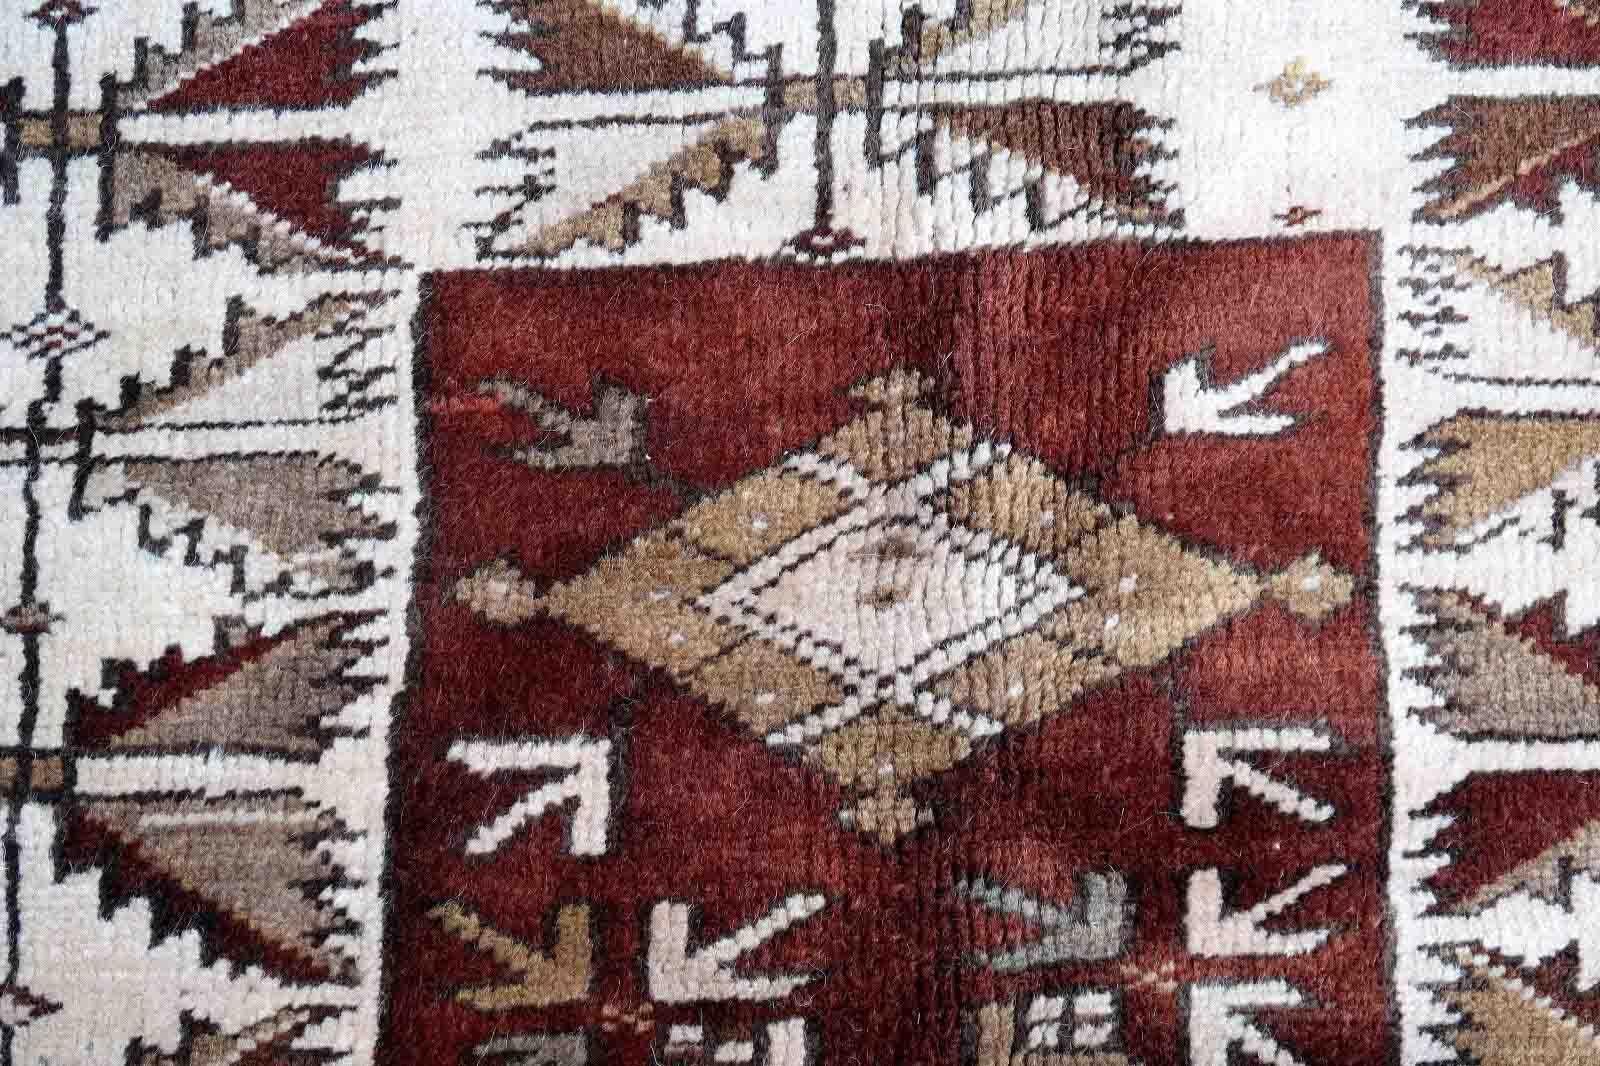 Handmade vintage Turkish rug from Melas region in natural dyes. The rug is from the middle of 20th century in original good condition.

-condition: original good,

-circa: 1940s,

-size: 3.9' x 6.5' (120cm x 200cm),

-material: